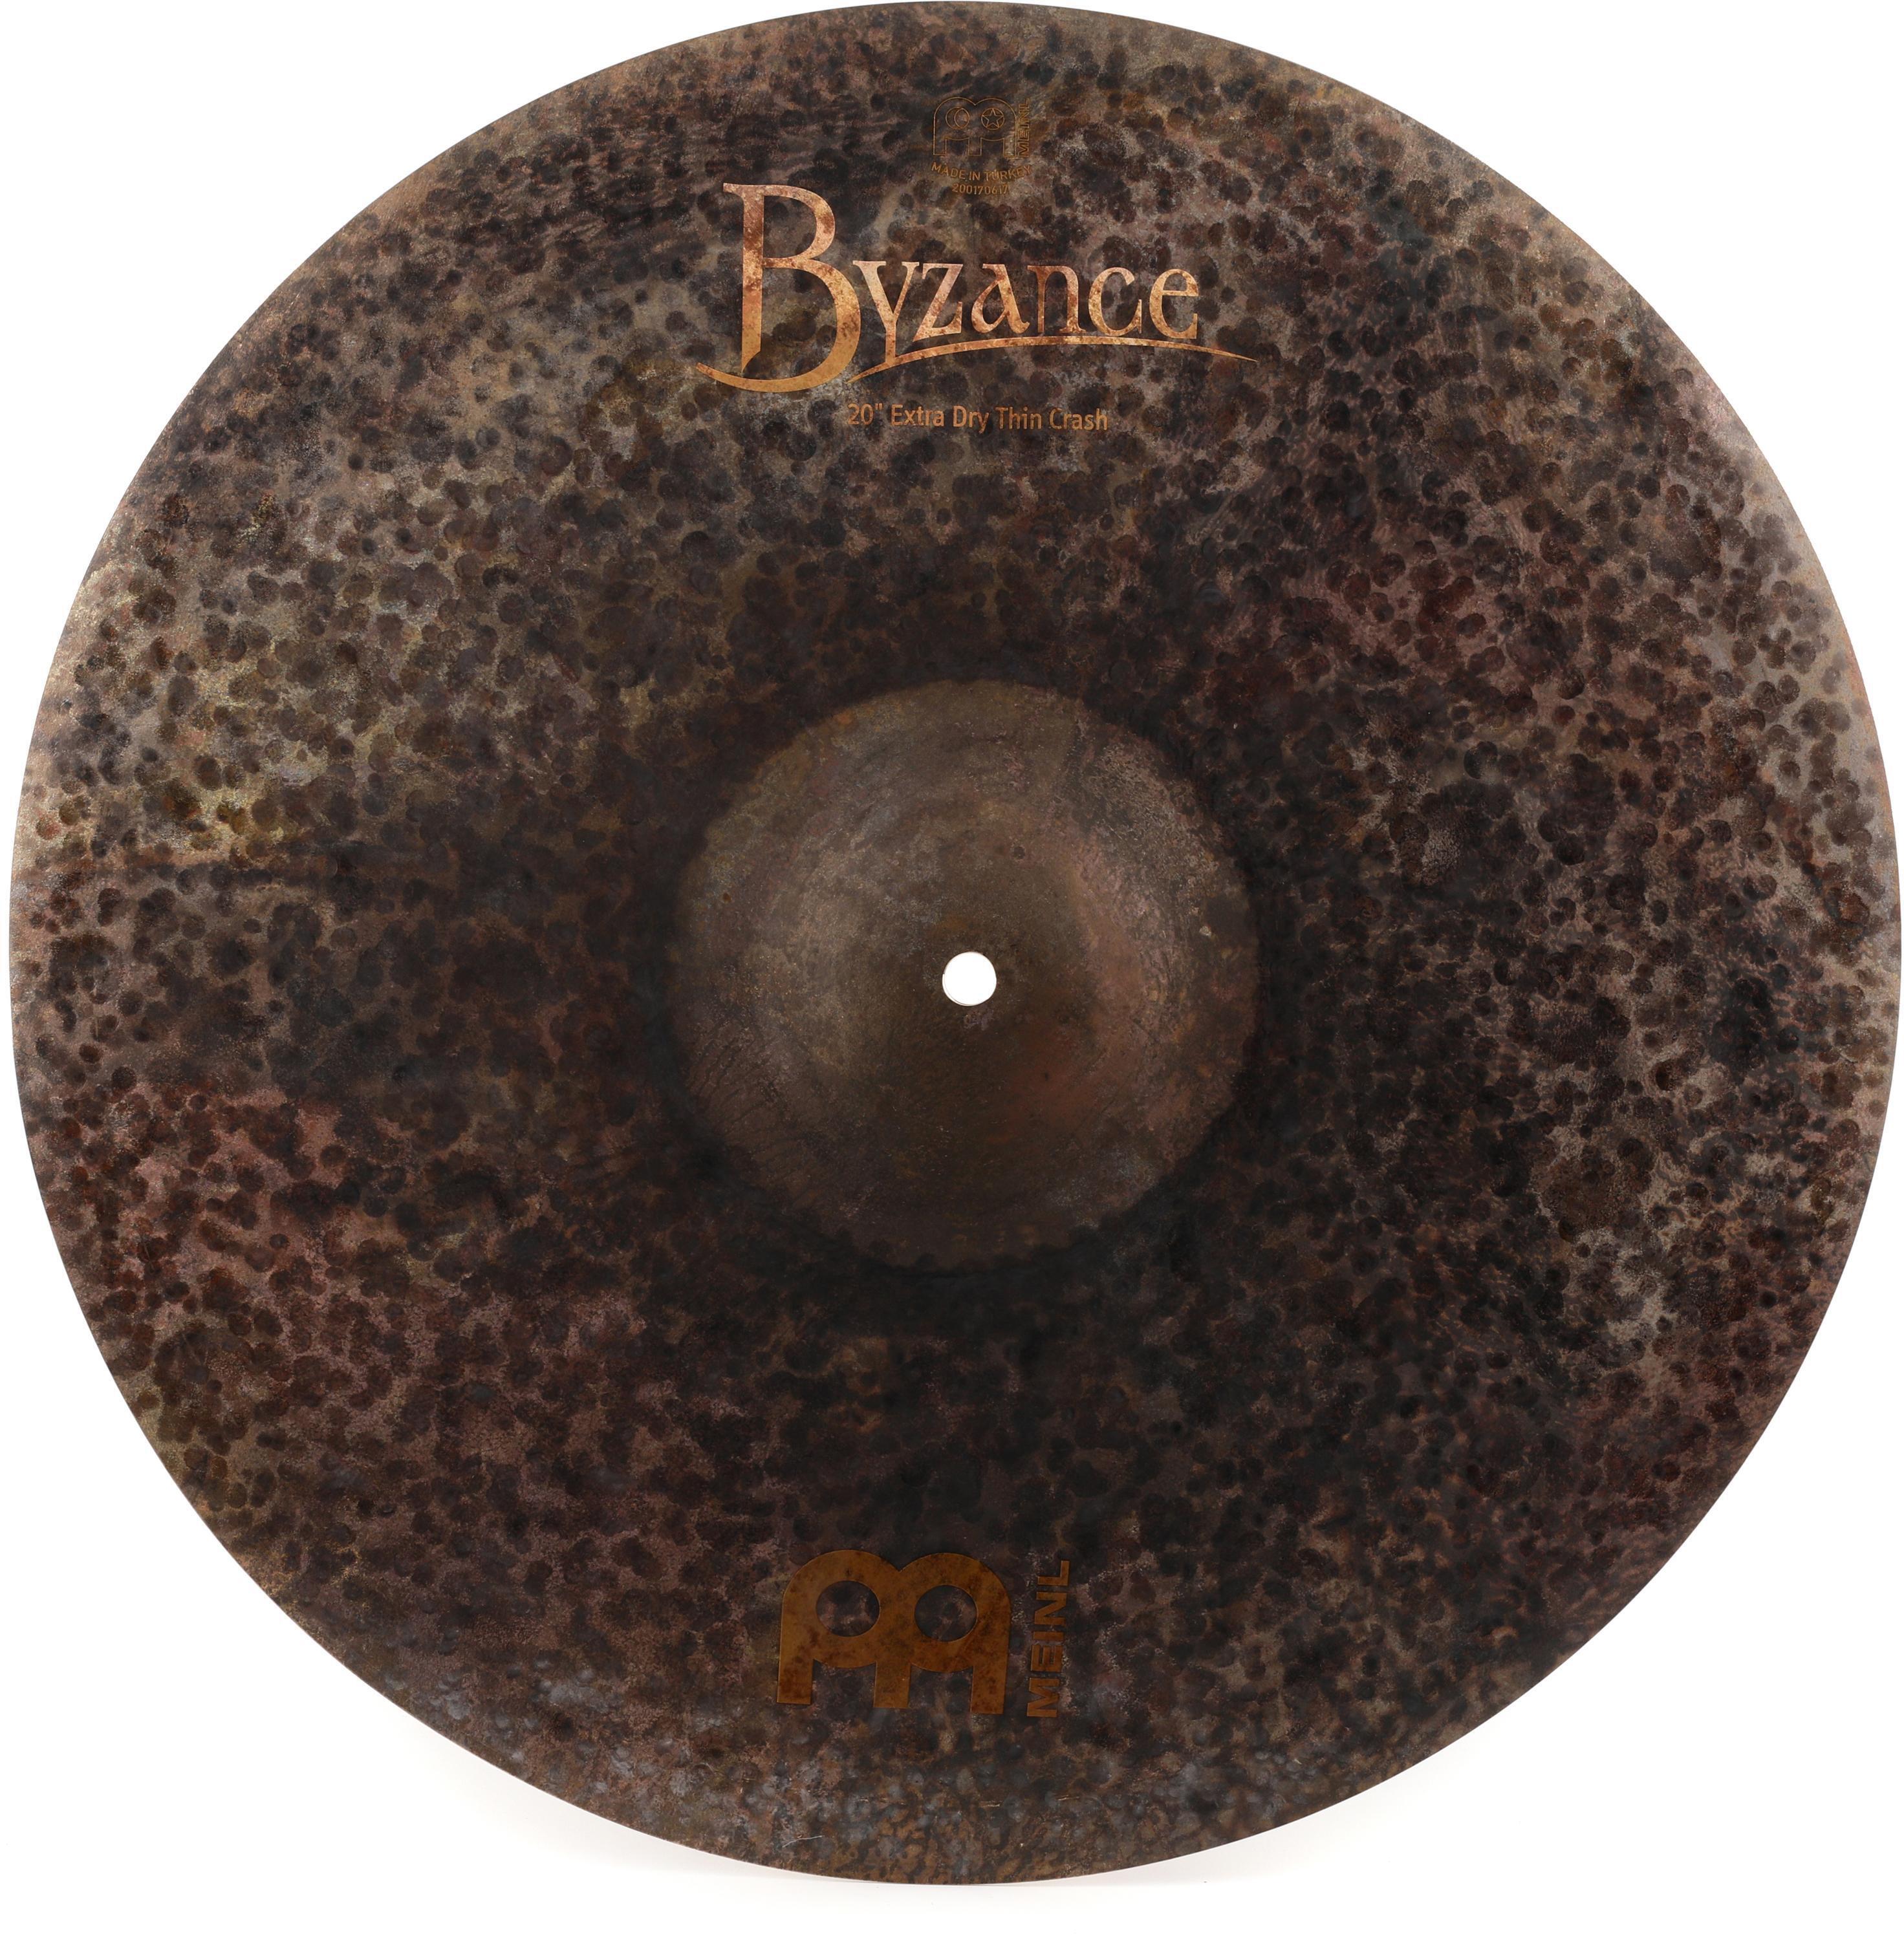 Meinl Cymbals 20 inch Byzance Extra Dry Thin Crash Cymbal | Sweetwater